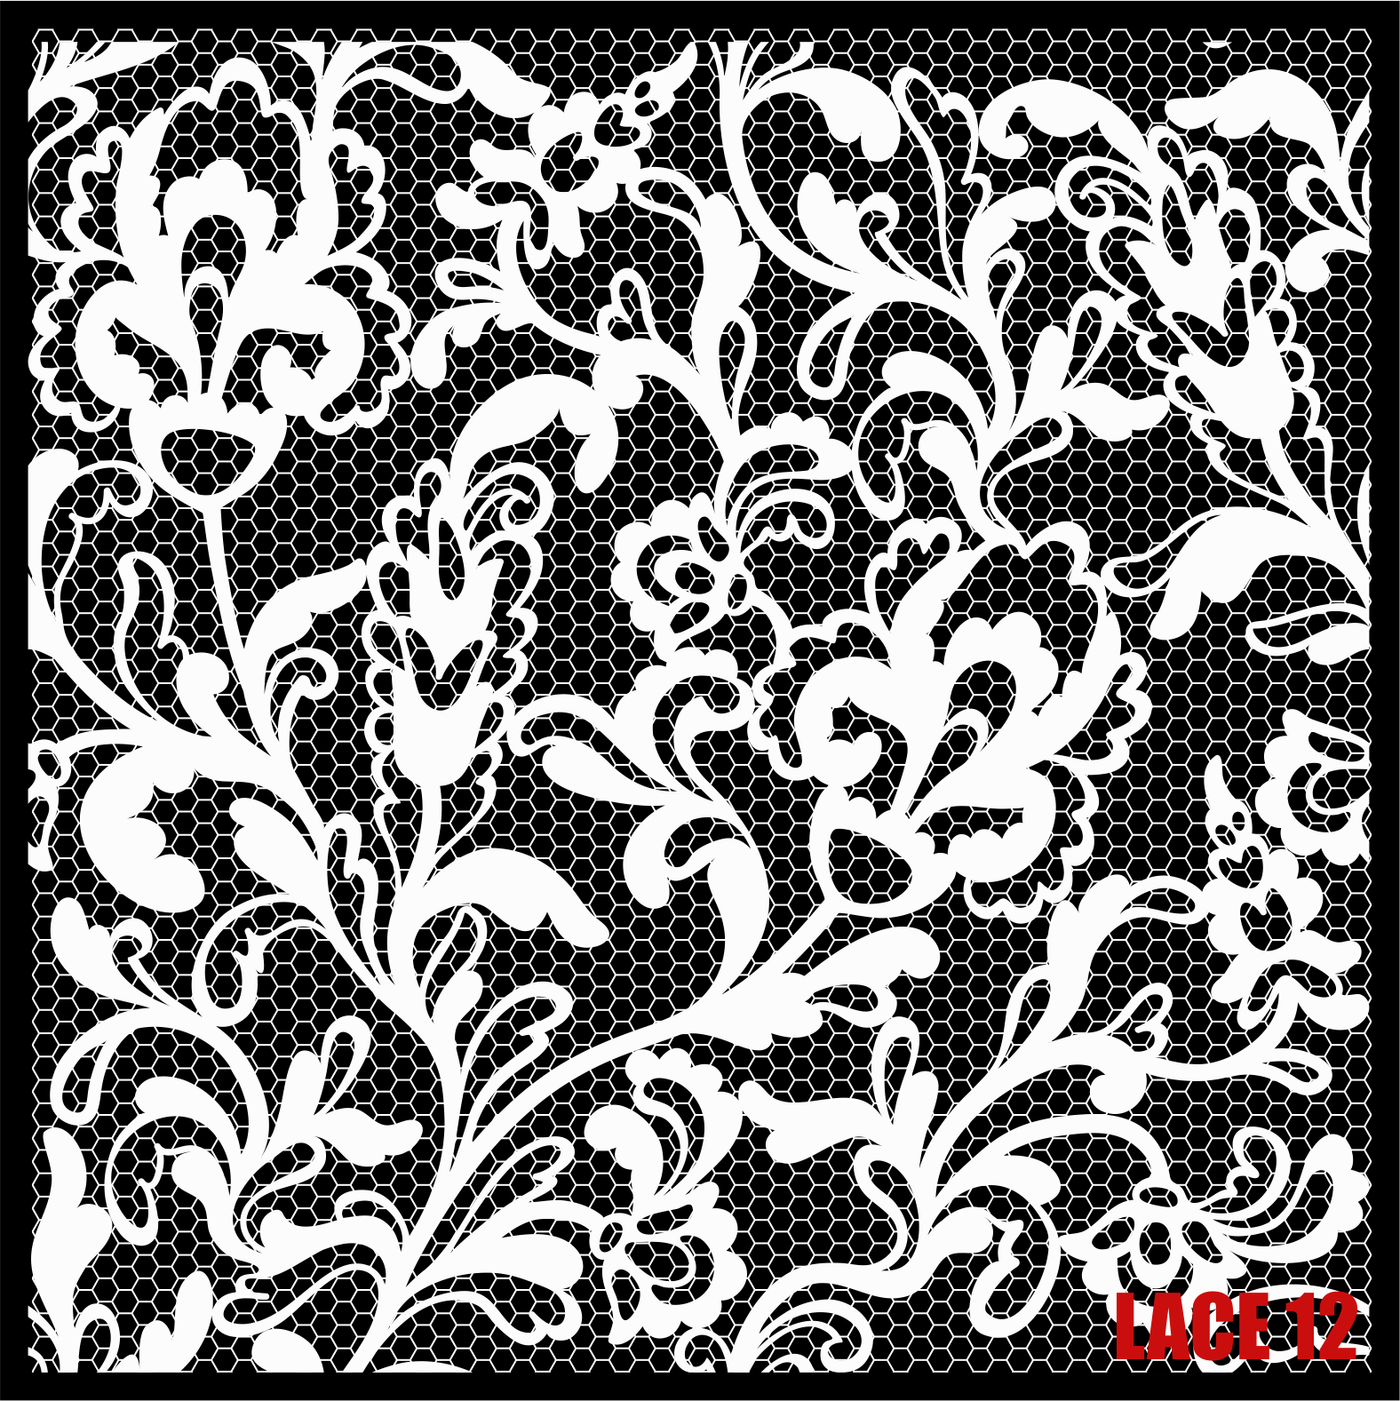 Adhesive Patterned Vinyl - White Ink Lace 12